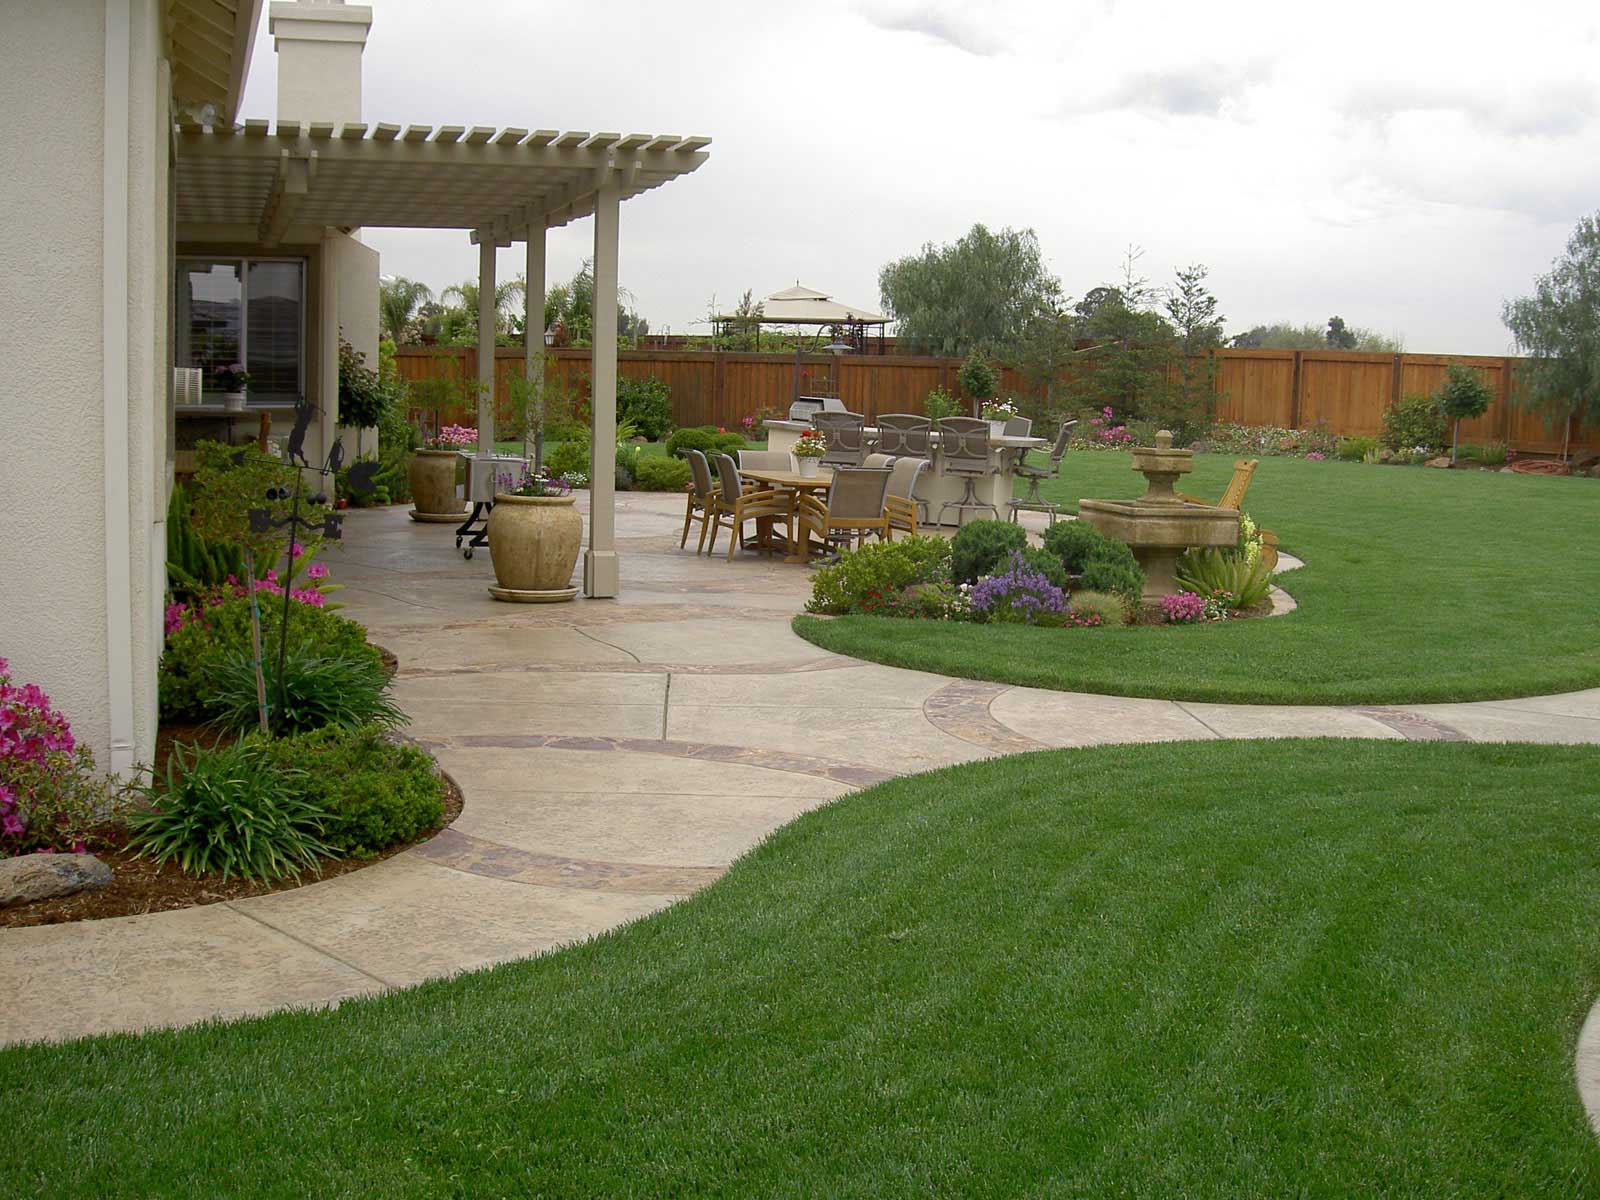 Backyard Landscape Green Modern Backyard Landscape Design Using Green Landscaping View Combined With Minimalist Outdoor Furniture Ideas Outdoor Backyard Landscape Design To Make The Most Of Your Space